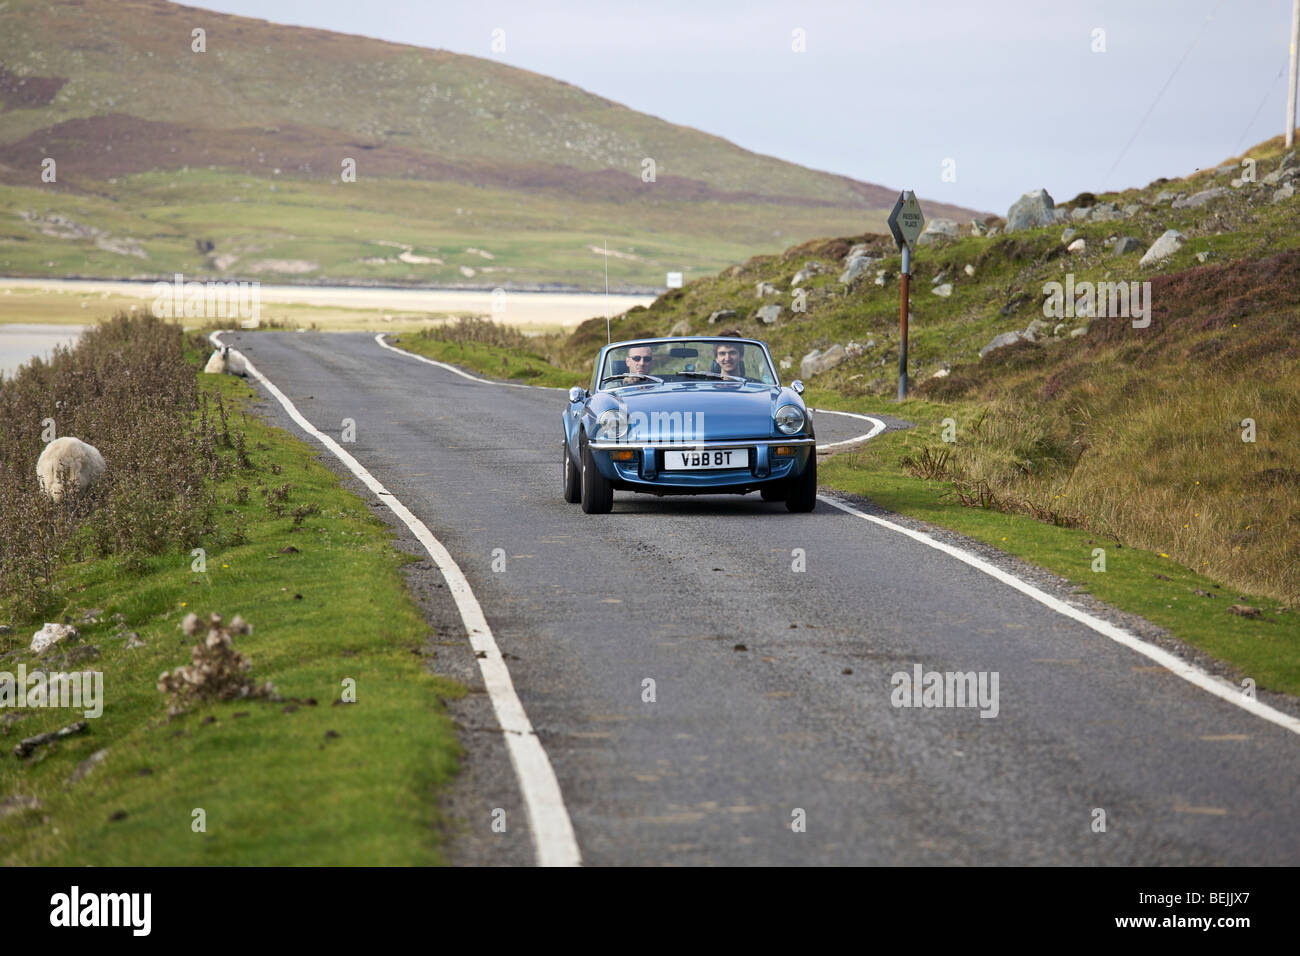 A classic sports car drives along an empty road on the Isle of Harris, Scotland Stock Photo